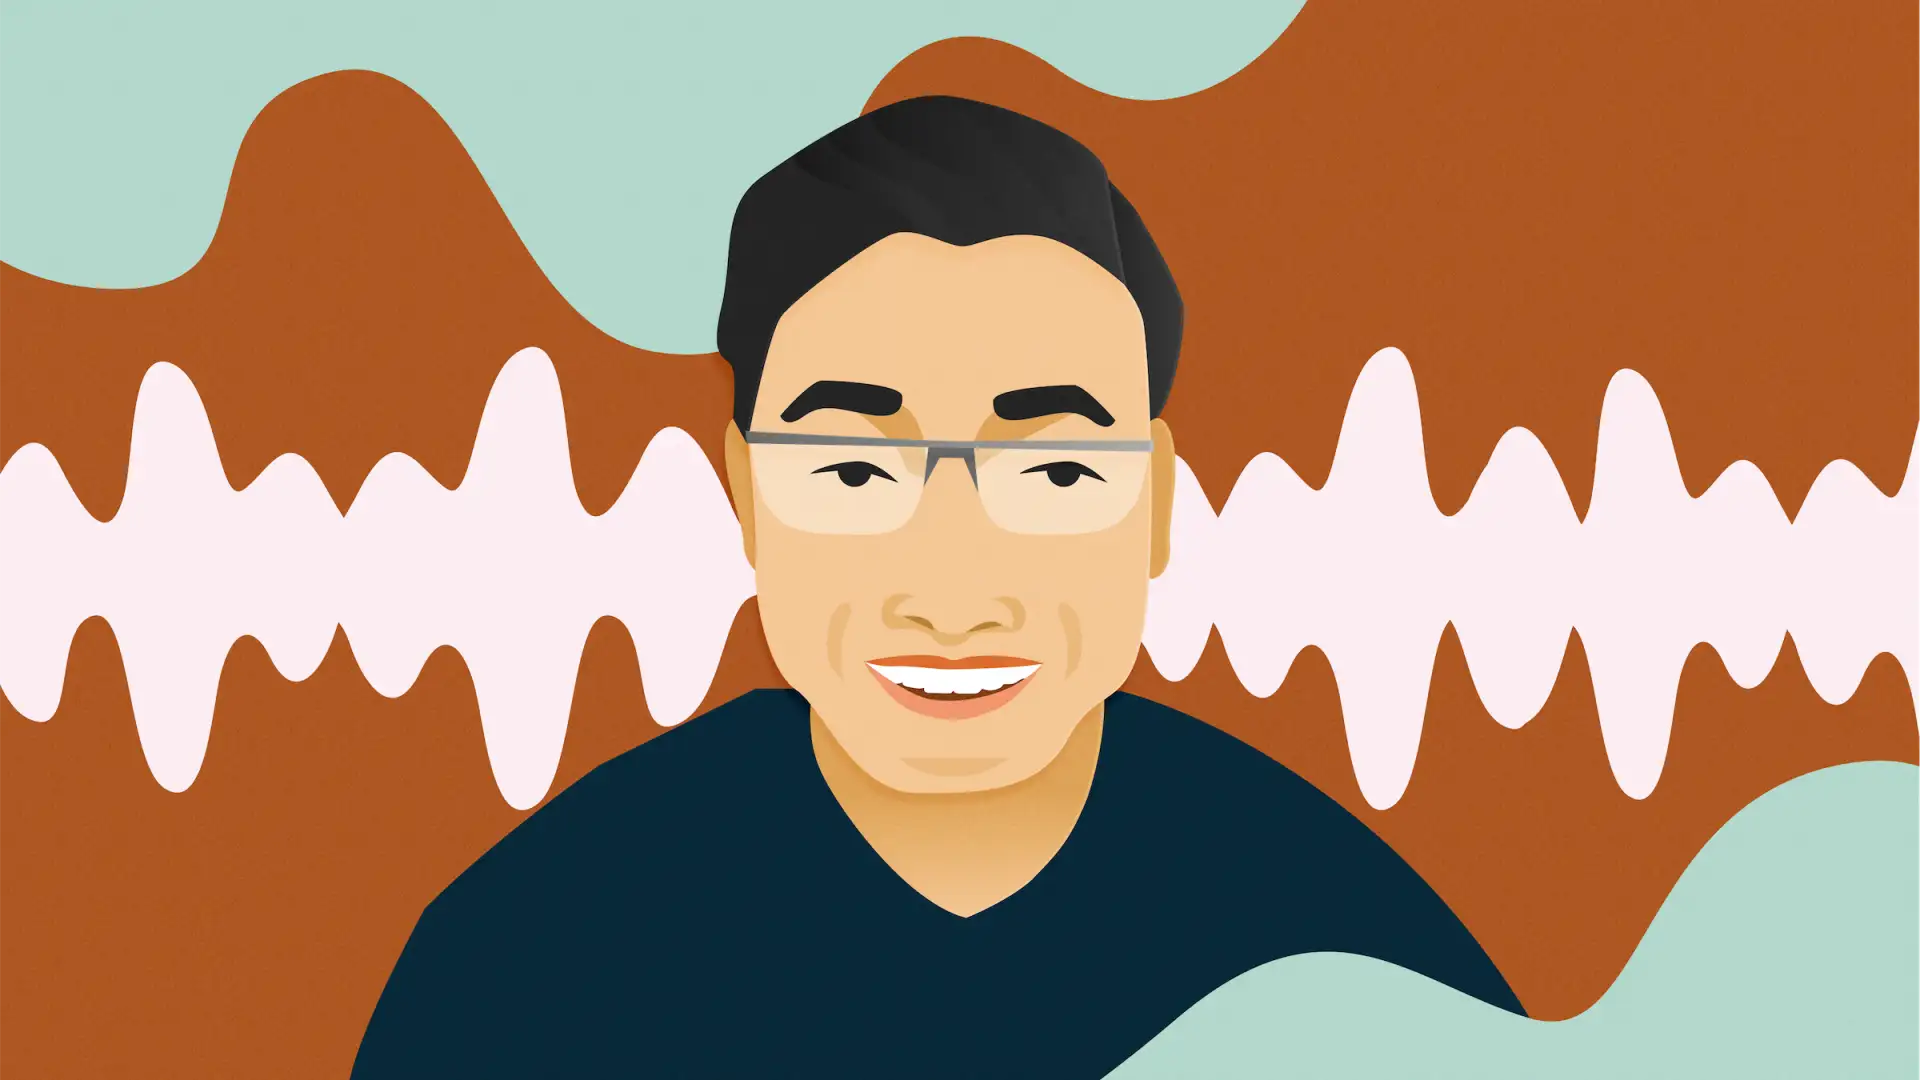 An illustration of author Preston So against an abstract background resembling a sound wave